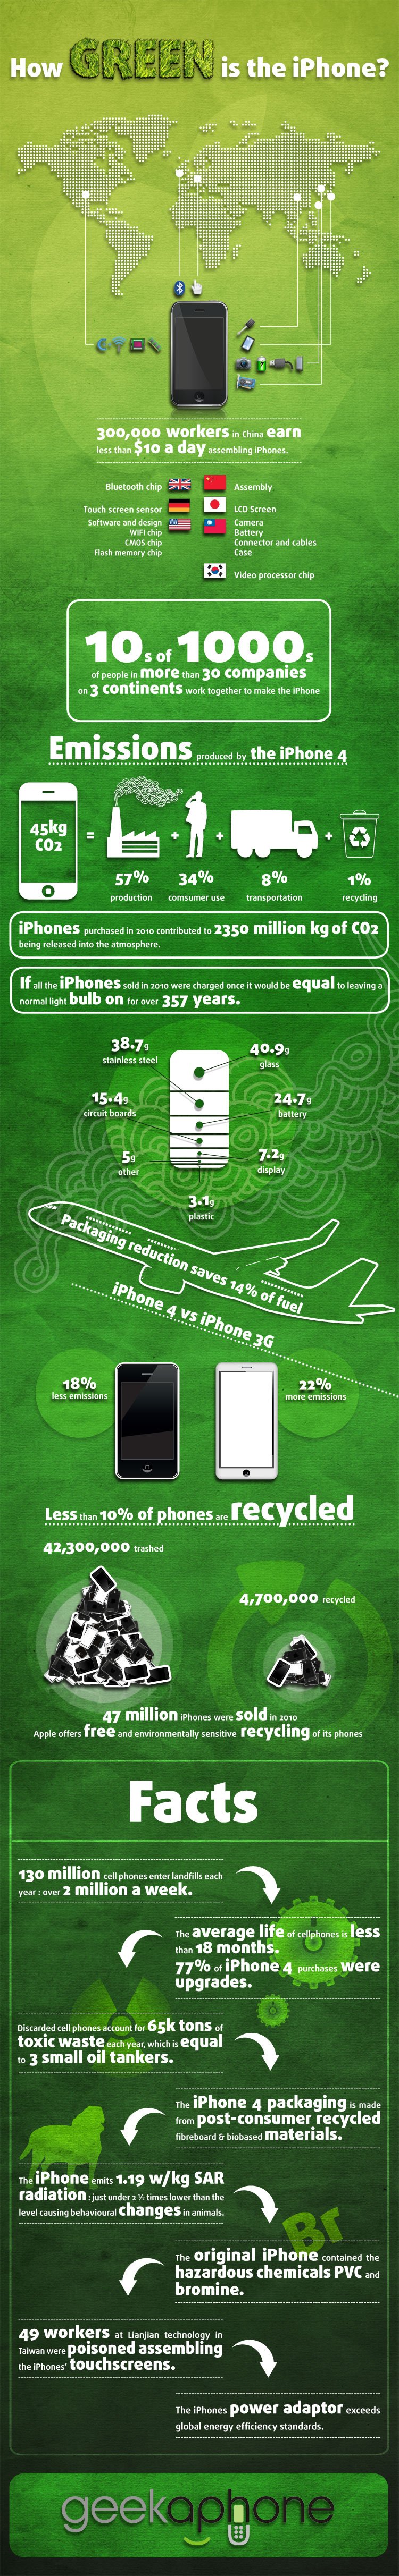 Howgreen is your iPhone infographic